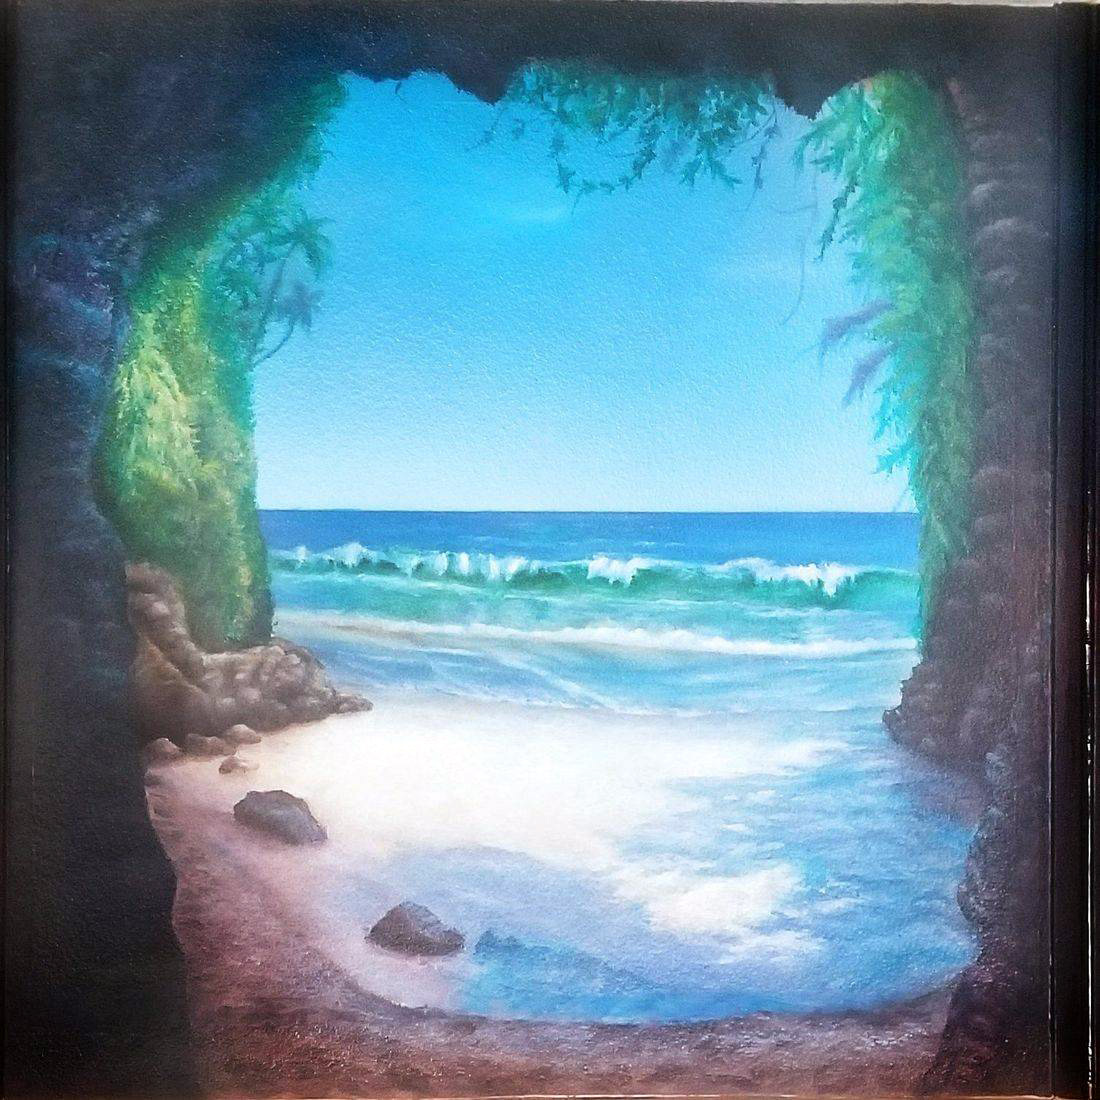 The Insider of a Cove by a Beach Painting on the Wall Copy